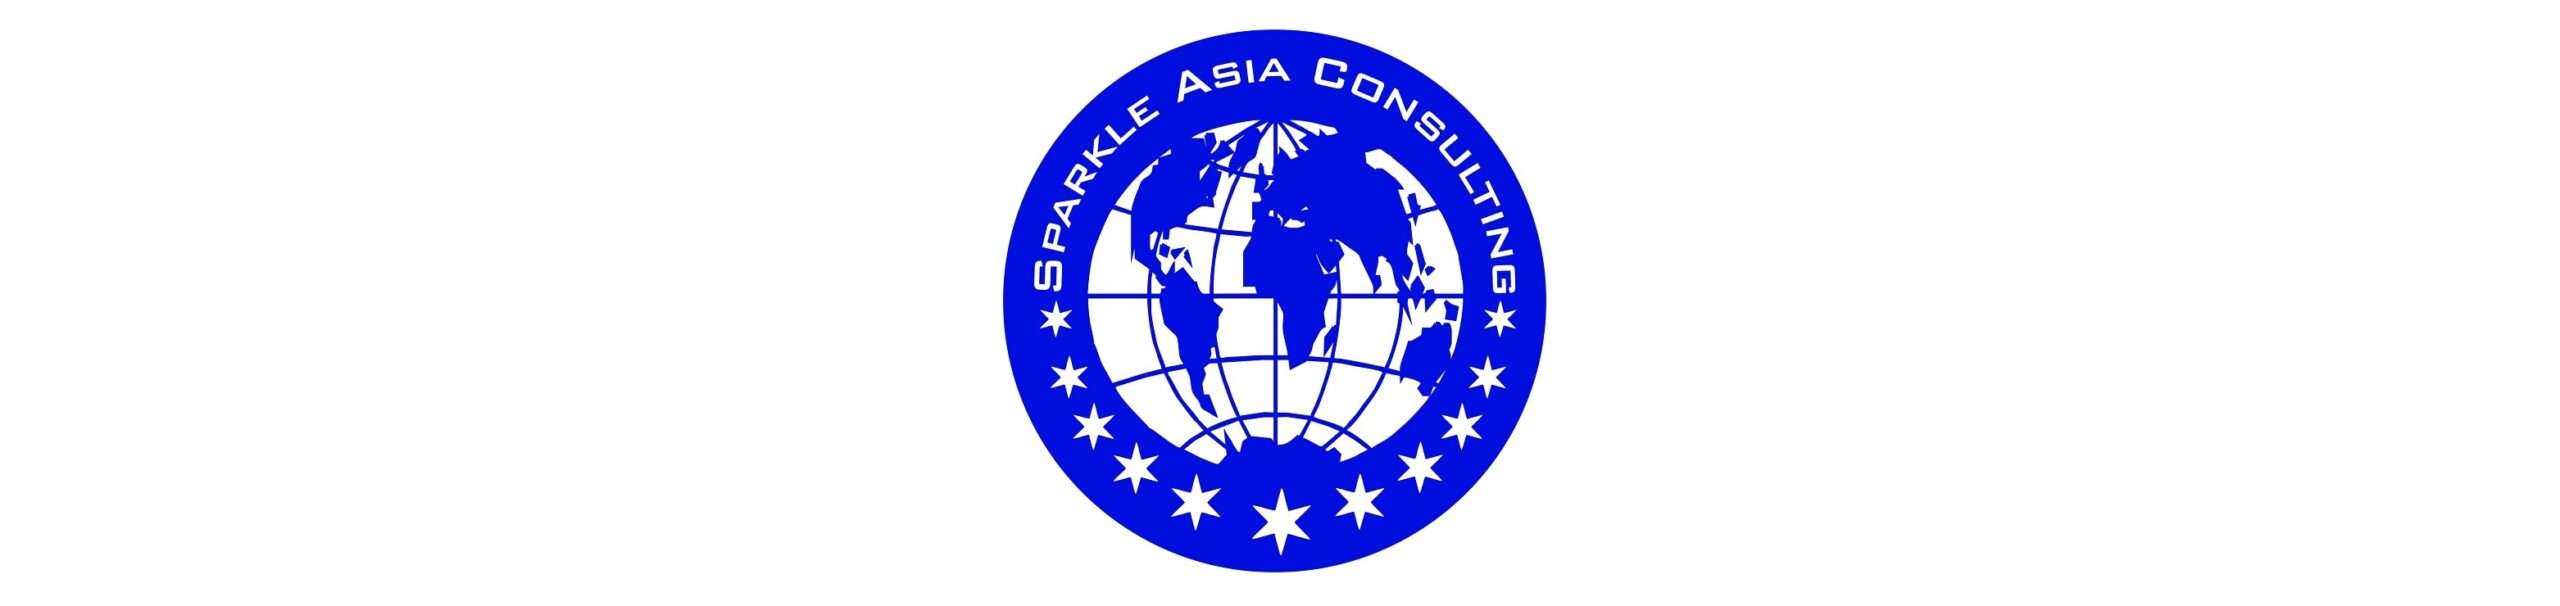 Sparkle Asia Consulting Oil and Gas Job Vacancies in Saudi Arabia